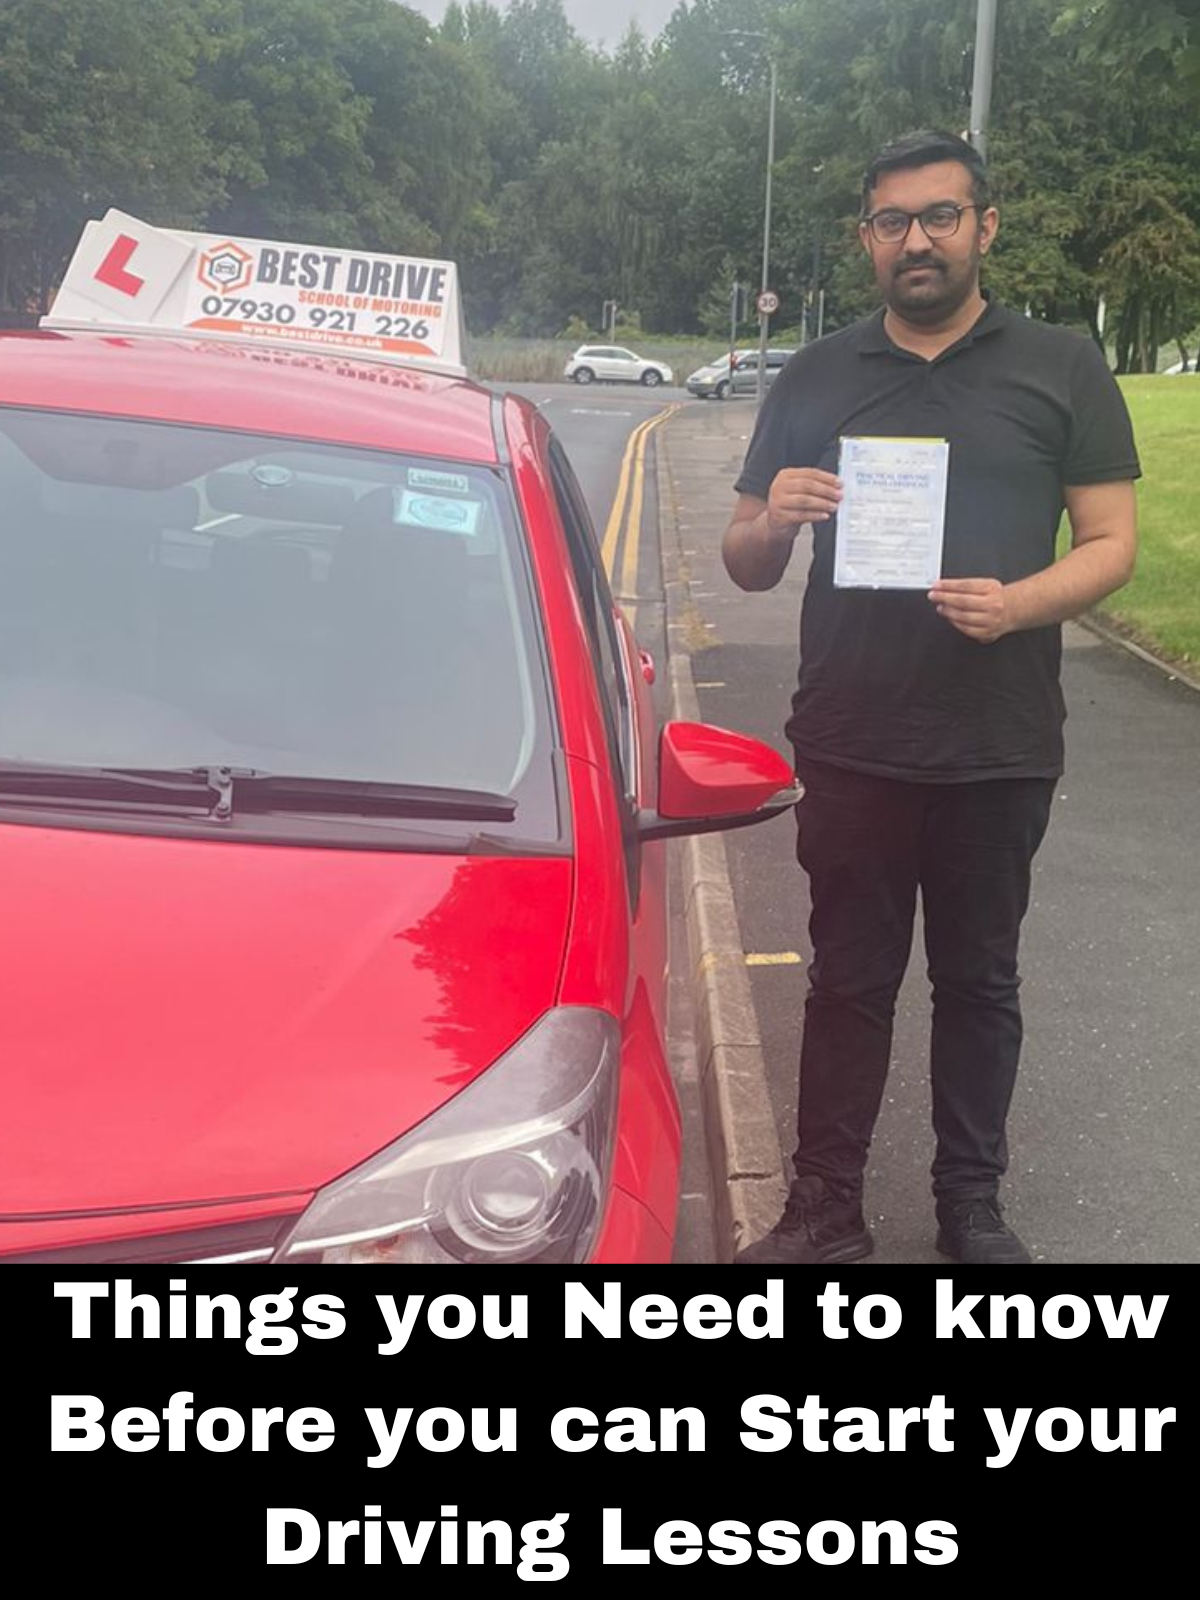 Things you Need to know Before you can Start your Driving Lessons